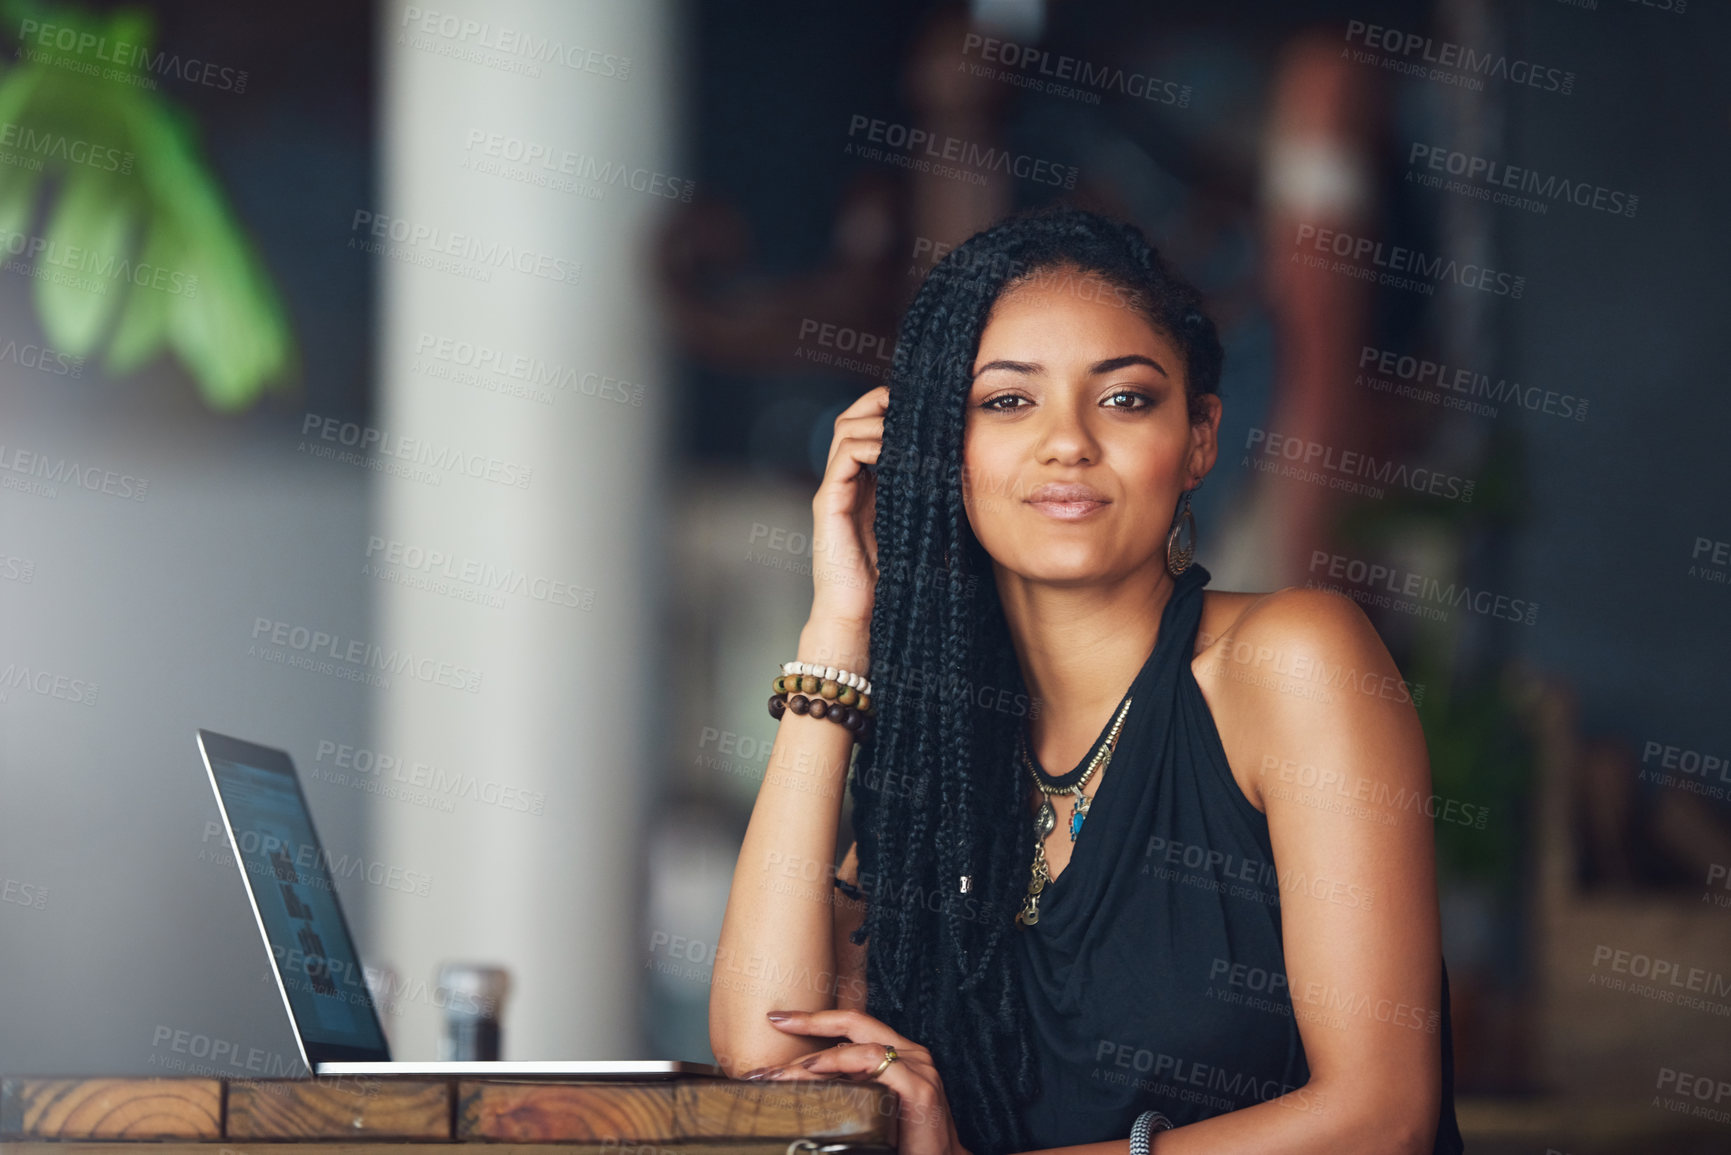 Buy stock photo Cropped portrait of an attractive young woman using her laptop in a coffee shop